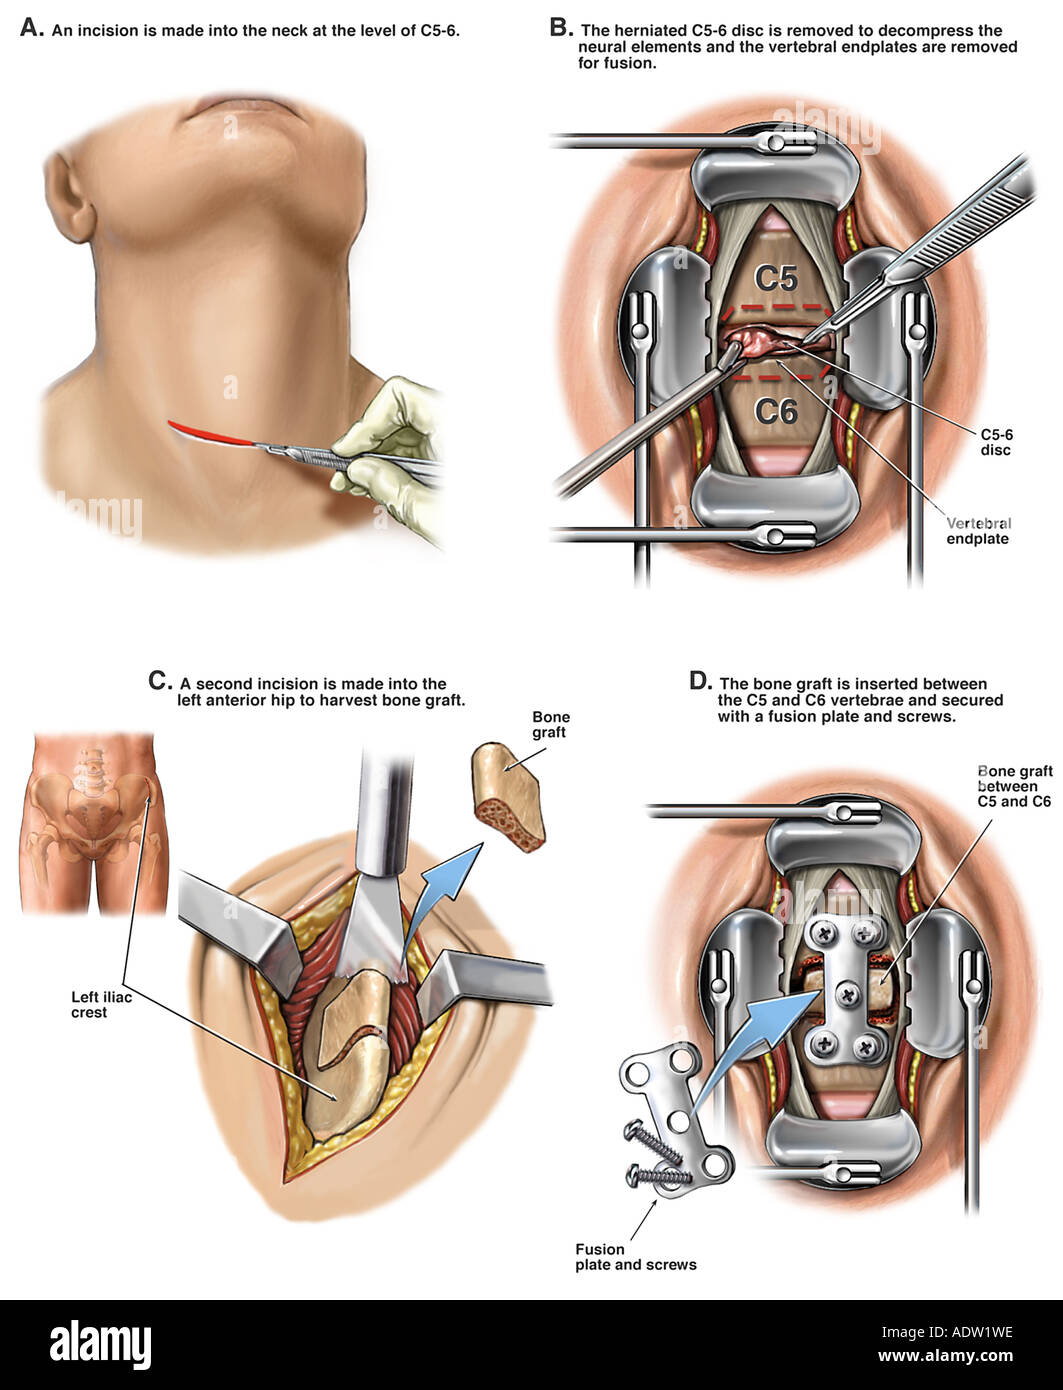 Proposed C5-6 Anterior Cervical Discectomy and Fusion Stock Photo